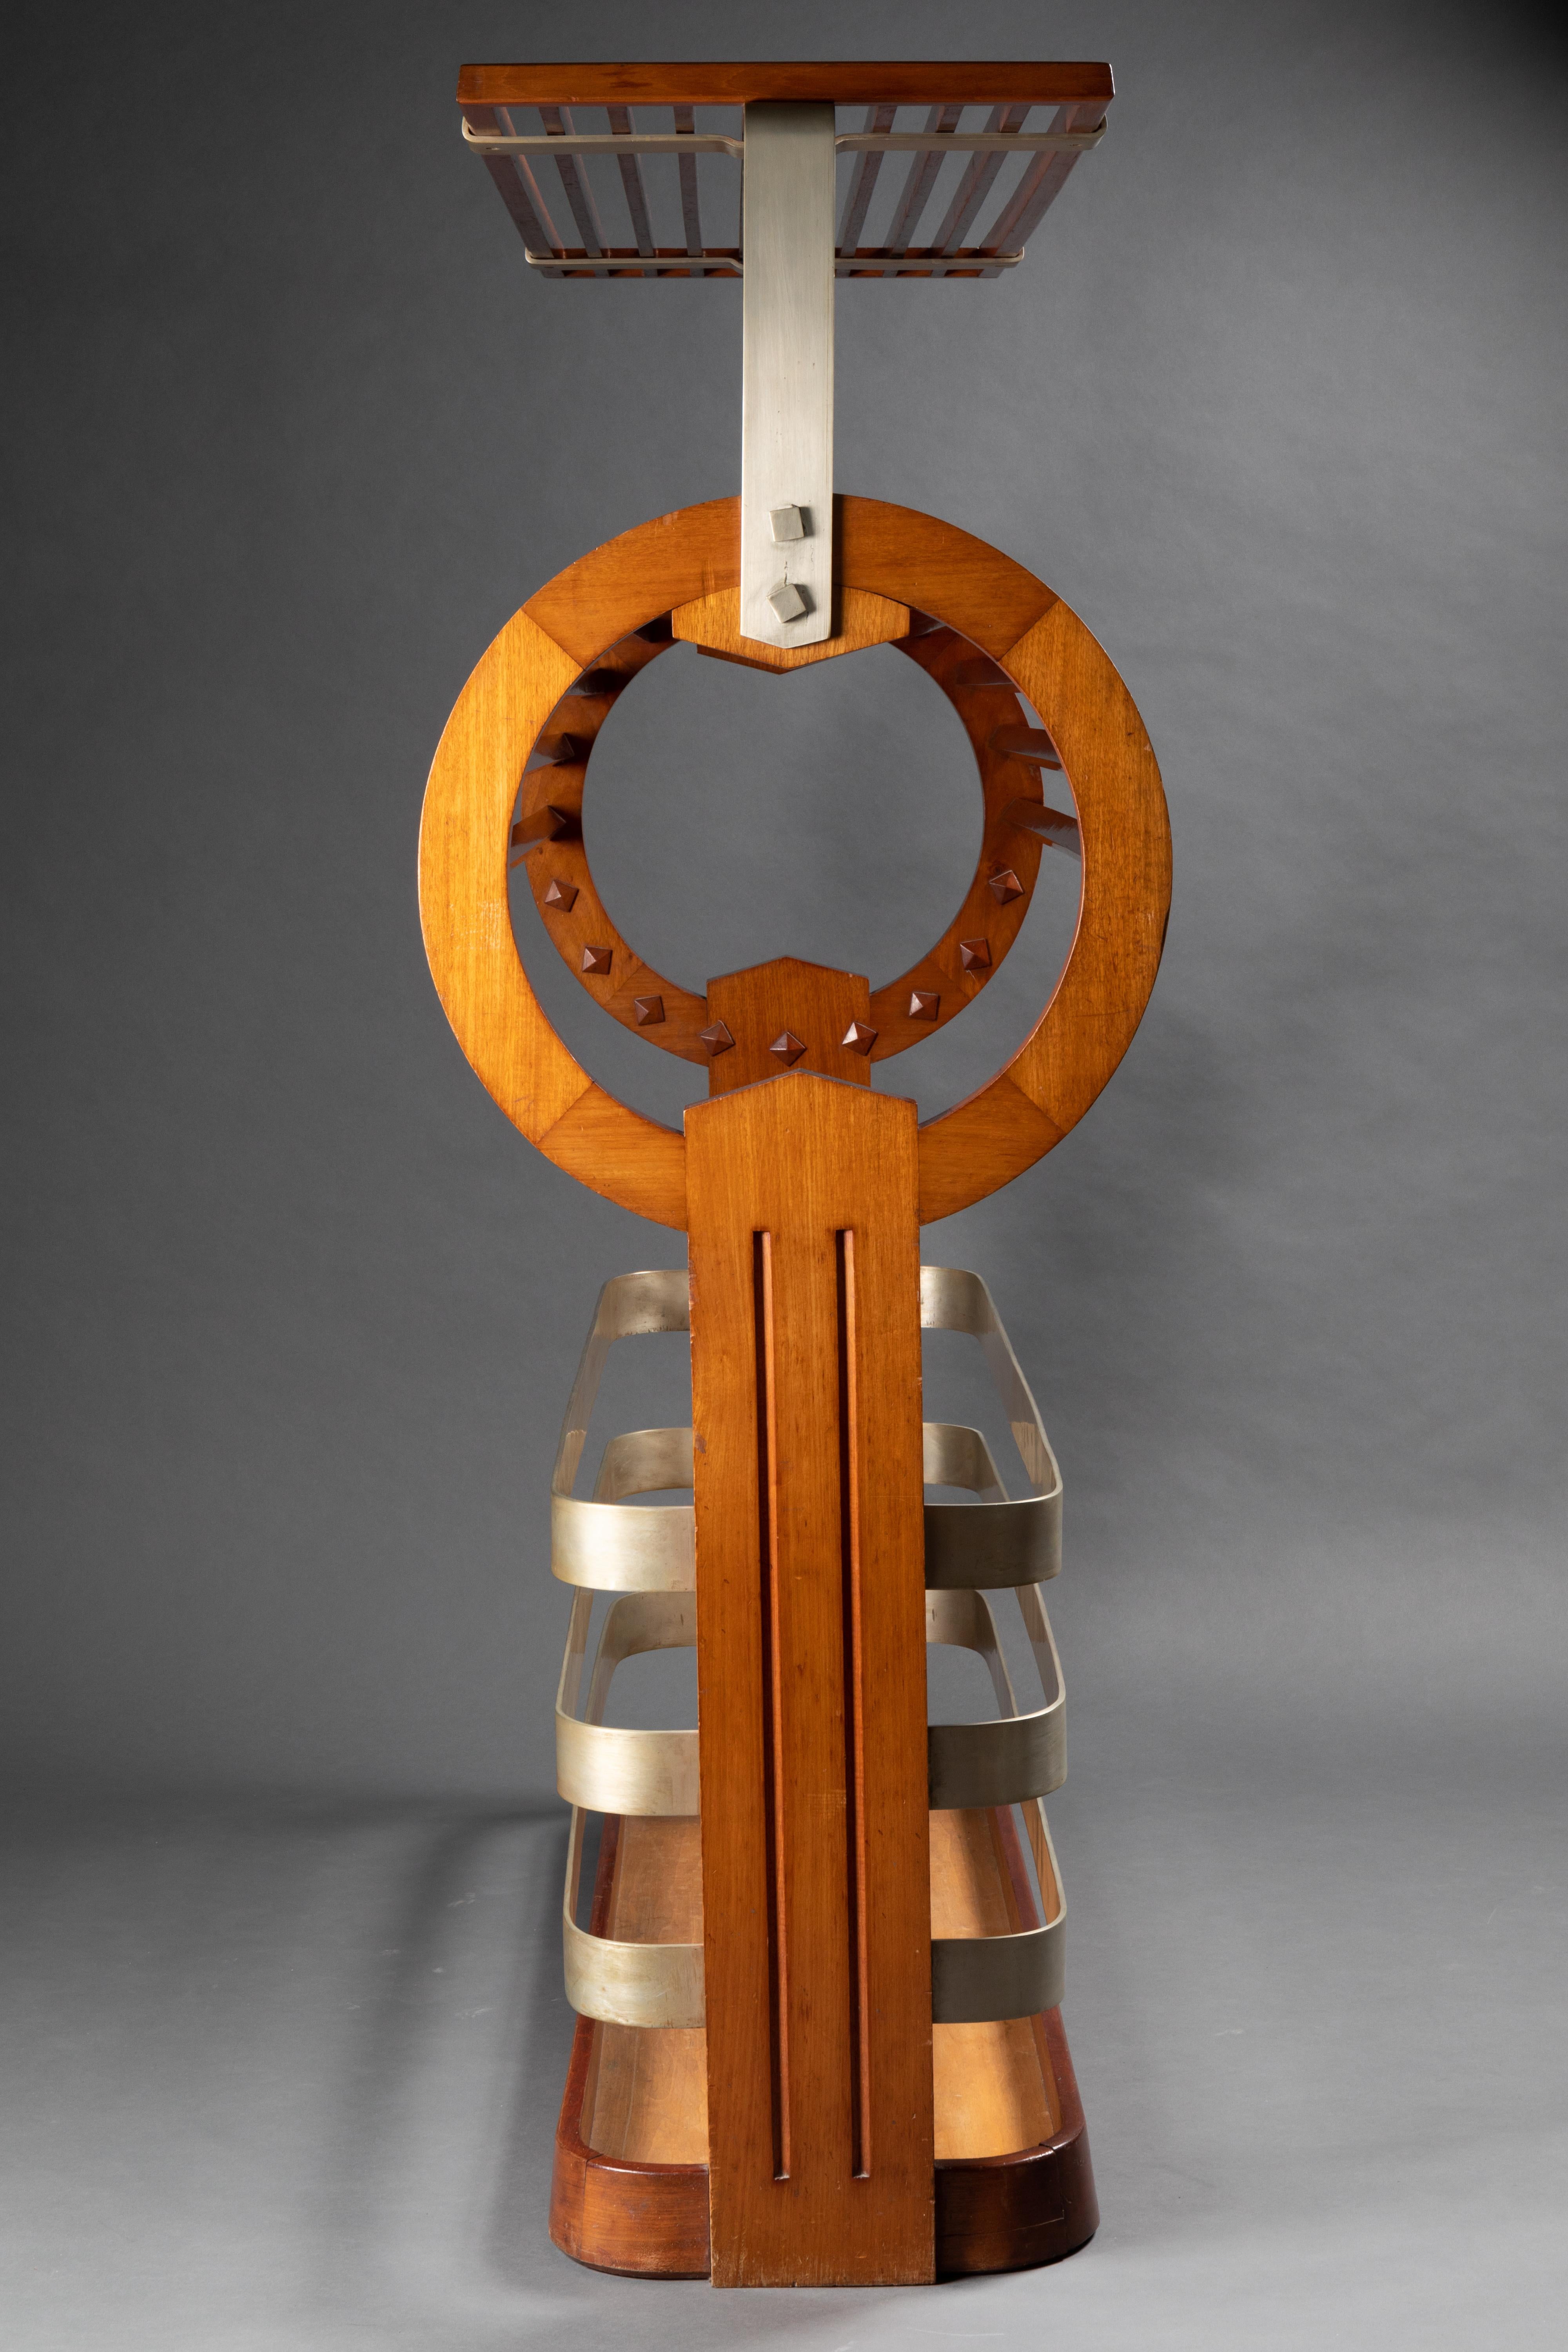 Jette-Habits stamped by Jorj Rual. 
Impressive coat rack in wood and metal. Beautifully designed and executed.
France, circa 1935.
